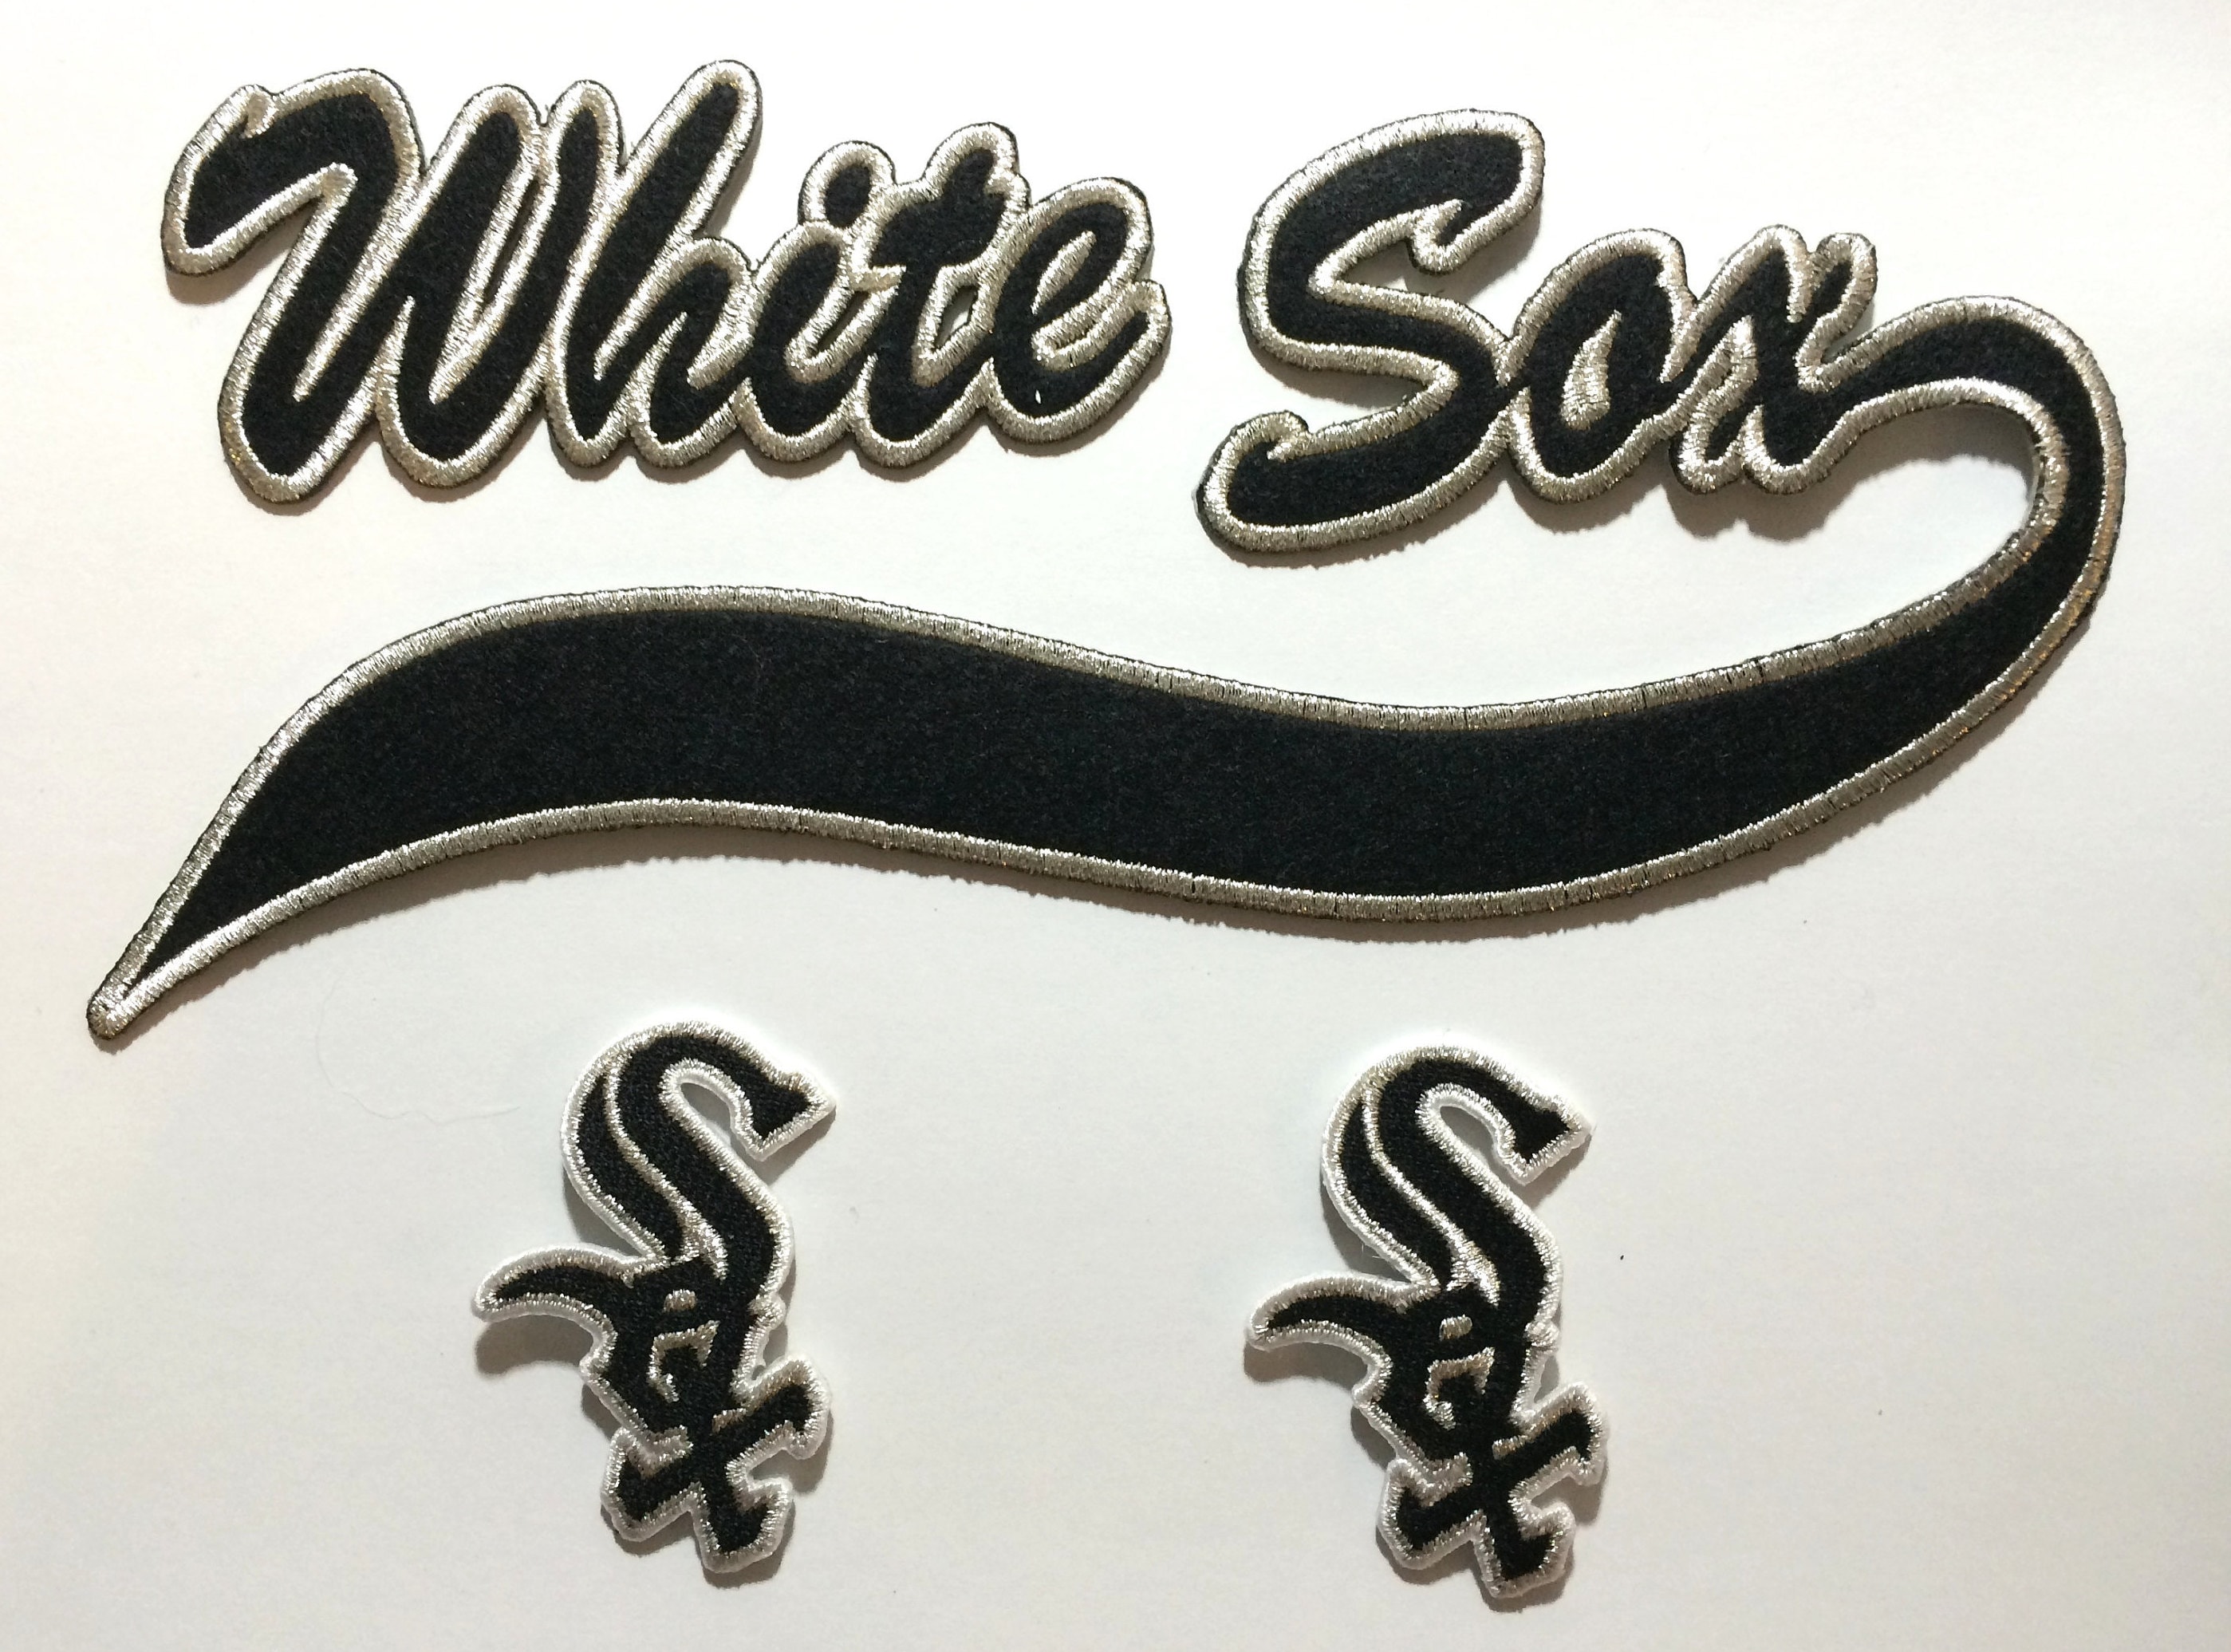 HUGE SCRIPT METALLIC CHICAGO WHITE SOX IRON-ON PATCH